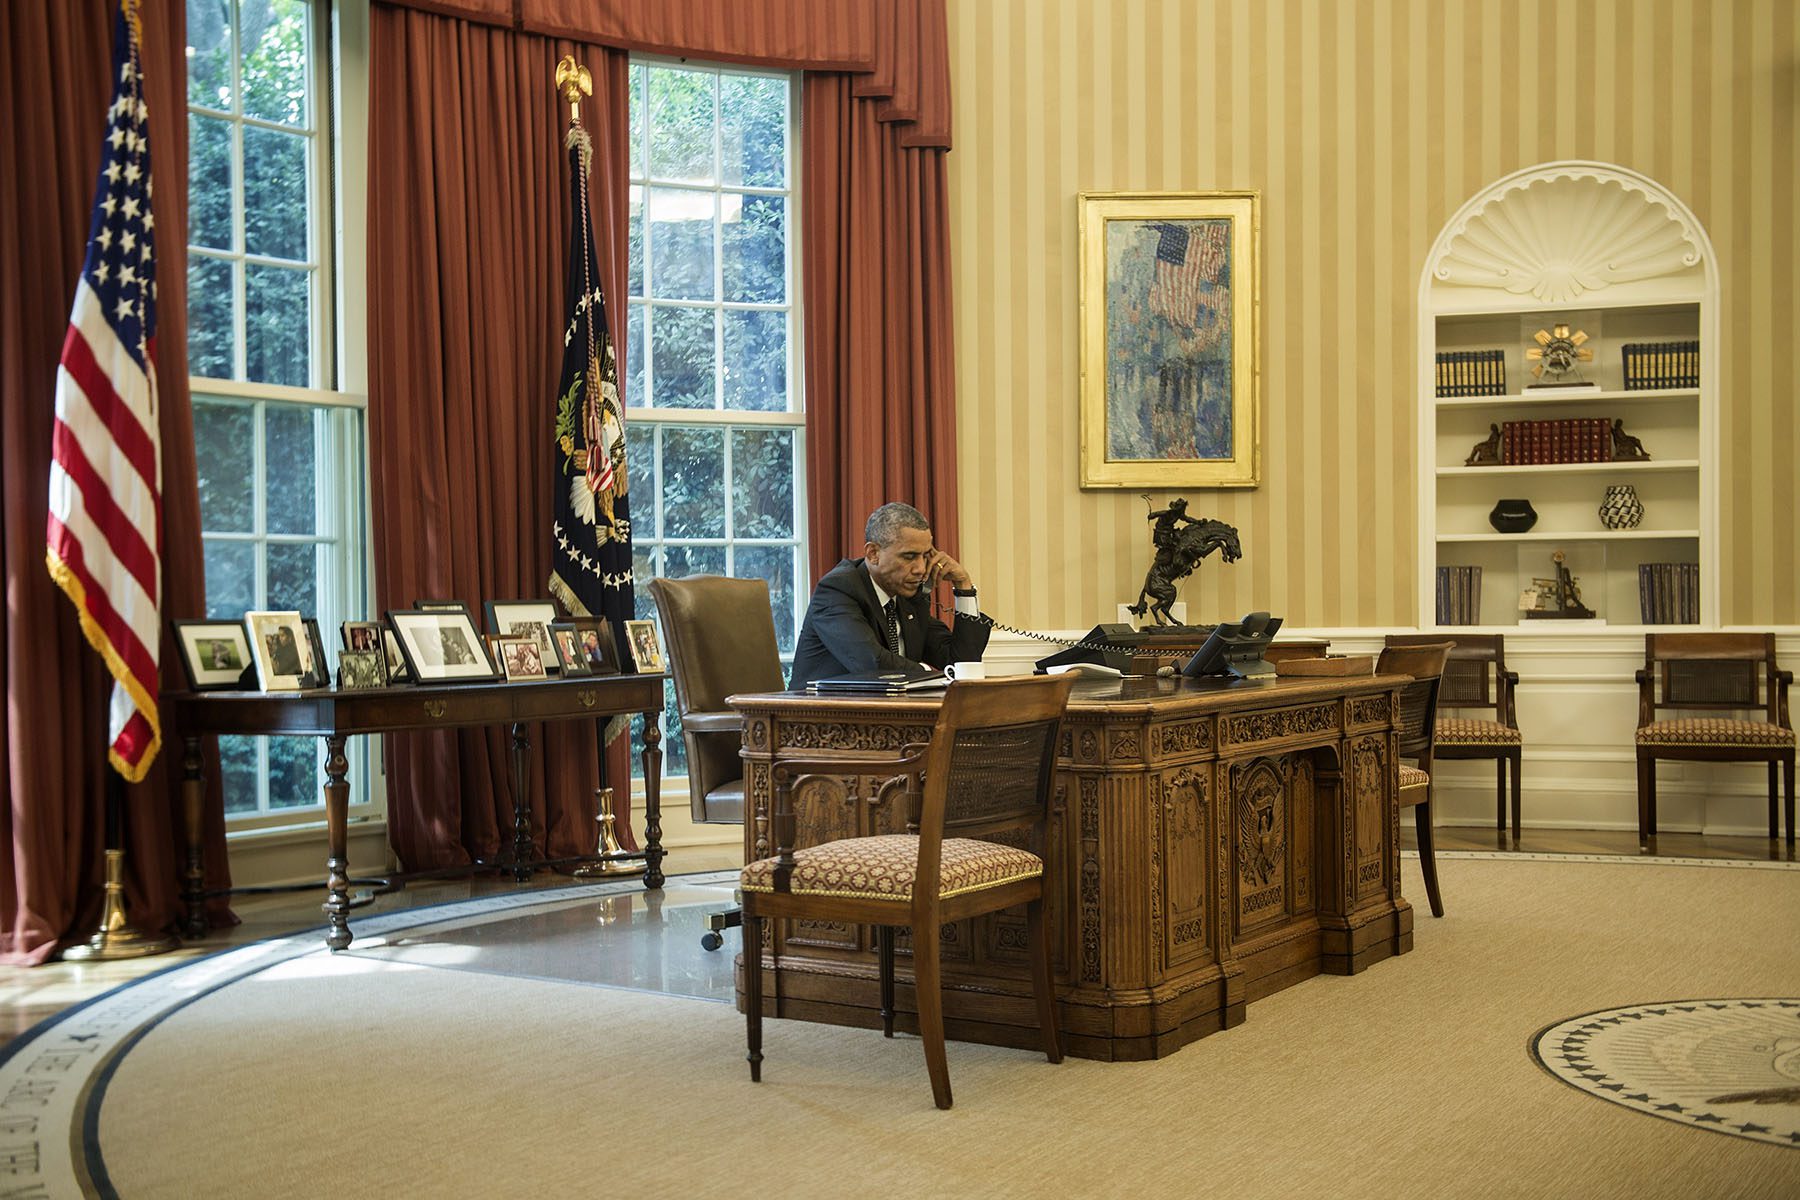 President Obama speaks on the phone in the Oval Office.